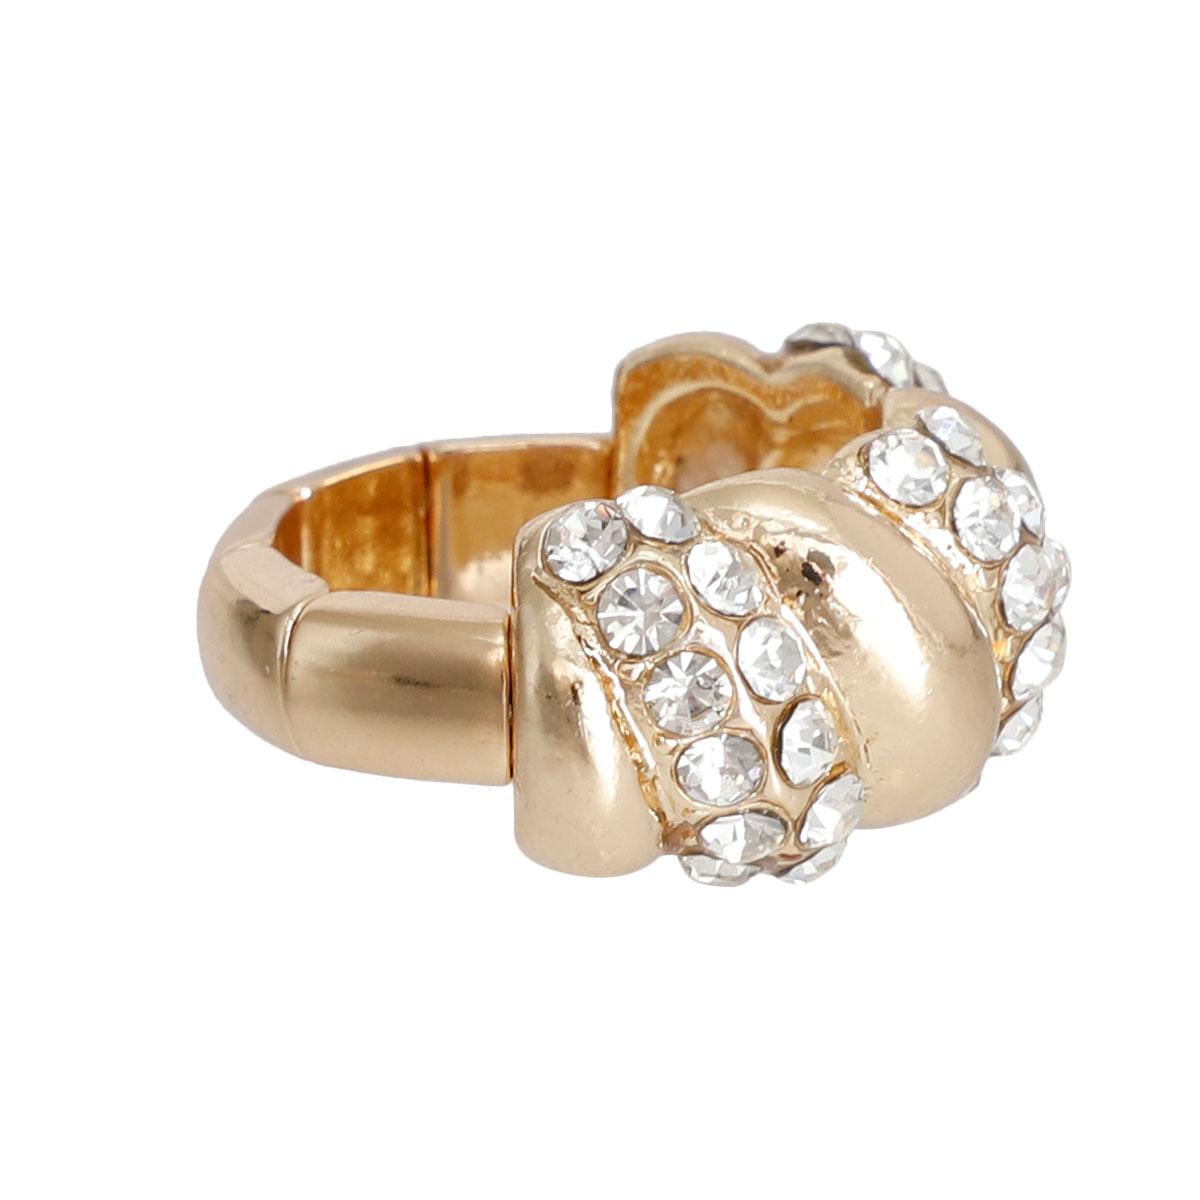 Eye-catching Gold-tone Women's Ring to Sparkle and Swirl